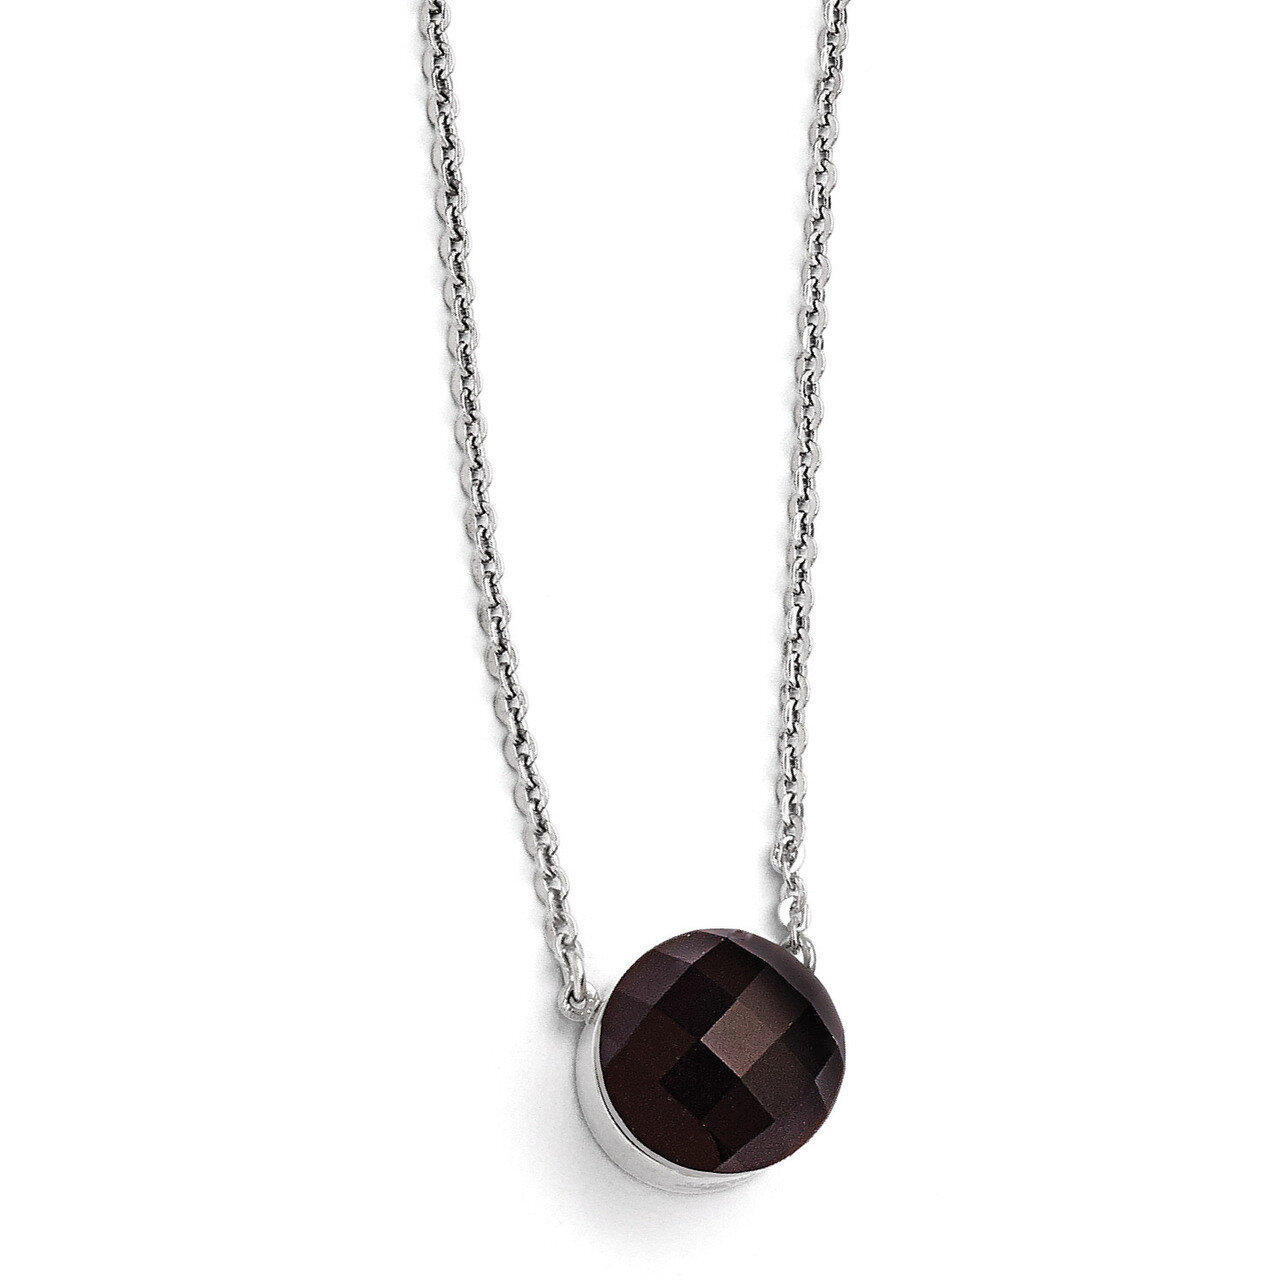 Polished Dark Brown Glass with 1 Inch Extension Necklace - Stainless Steel SRN1744-18